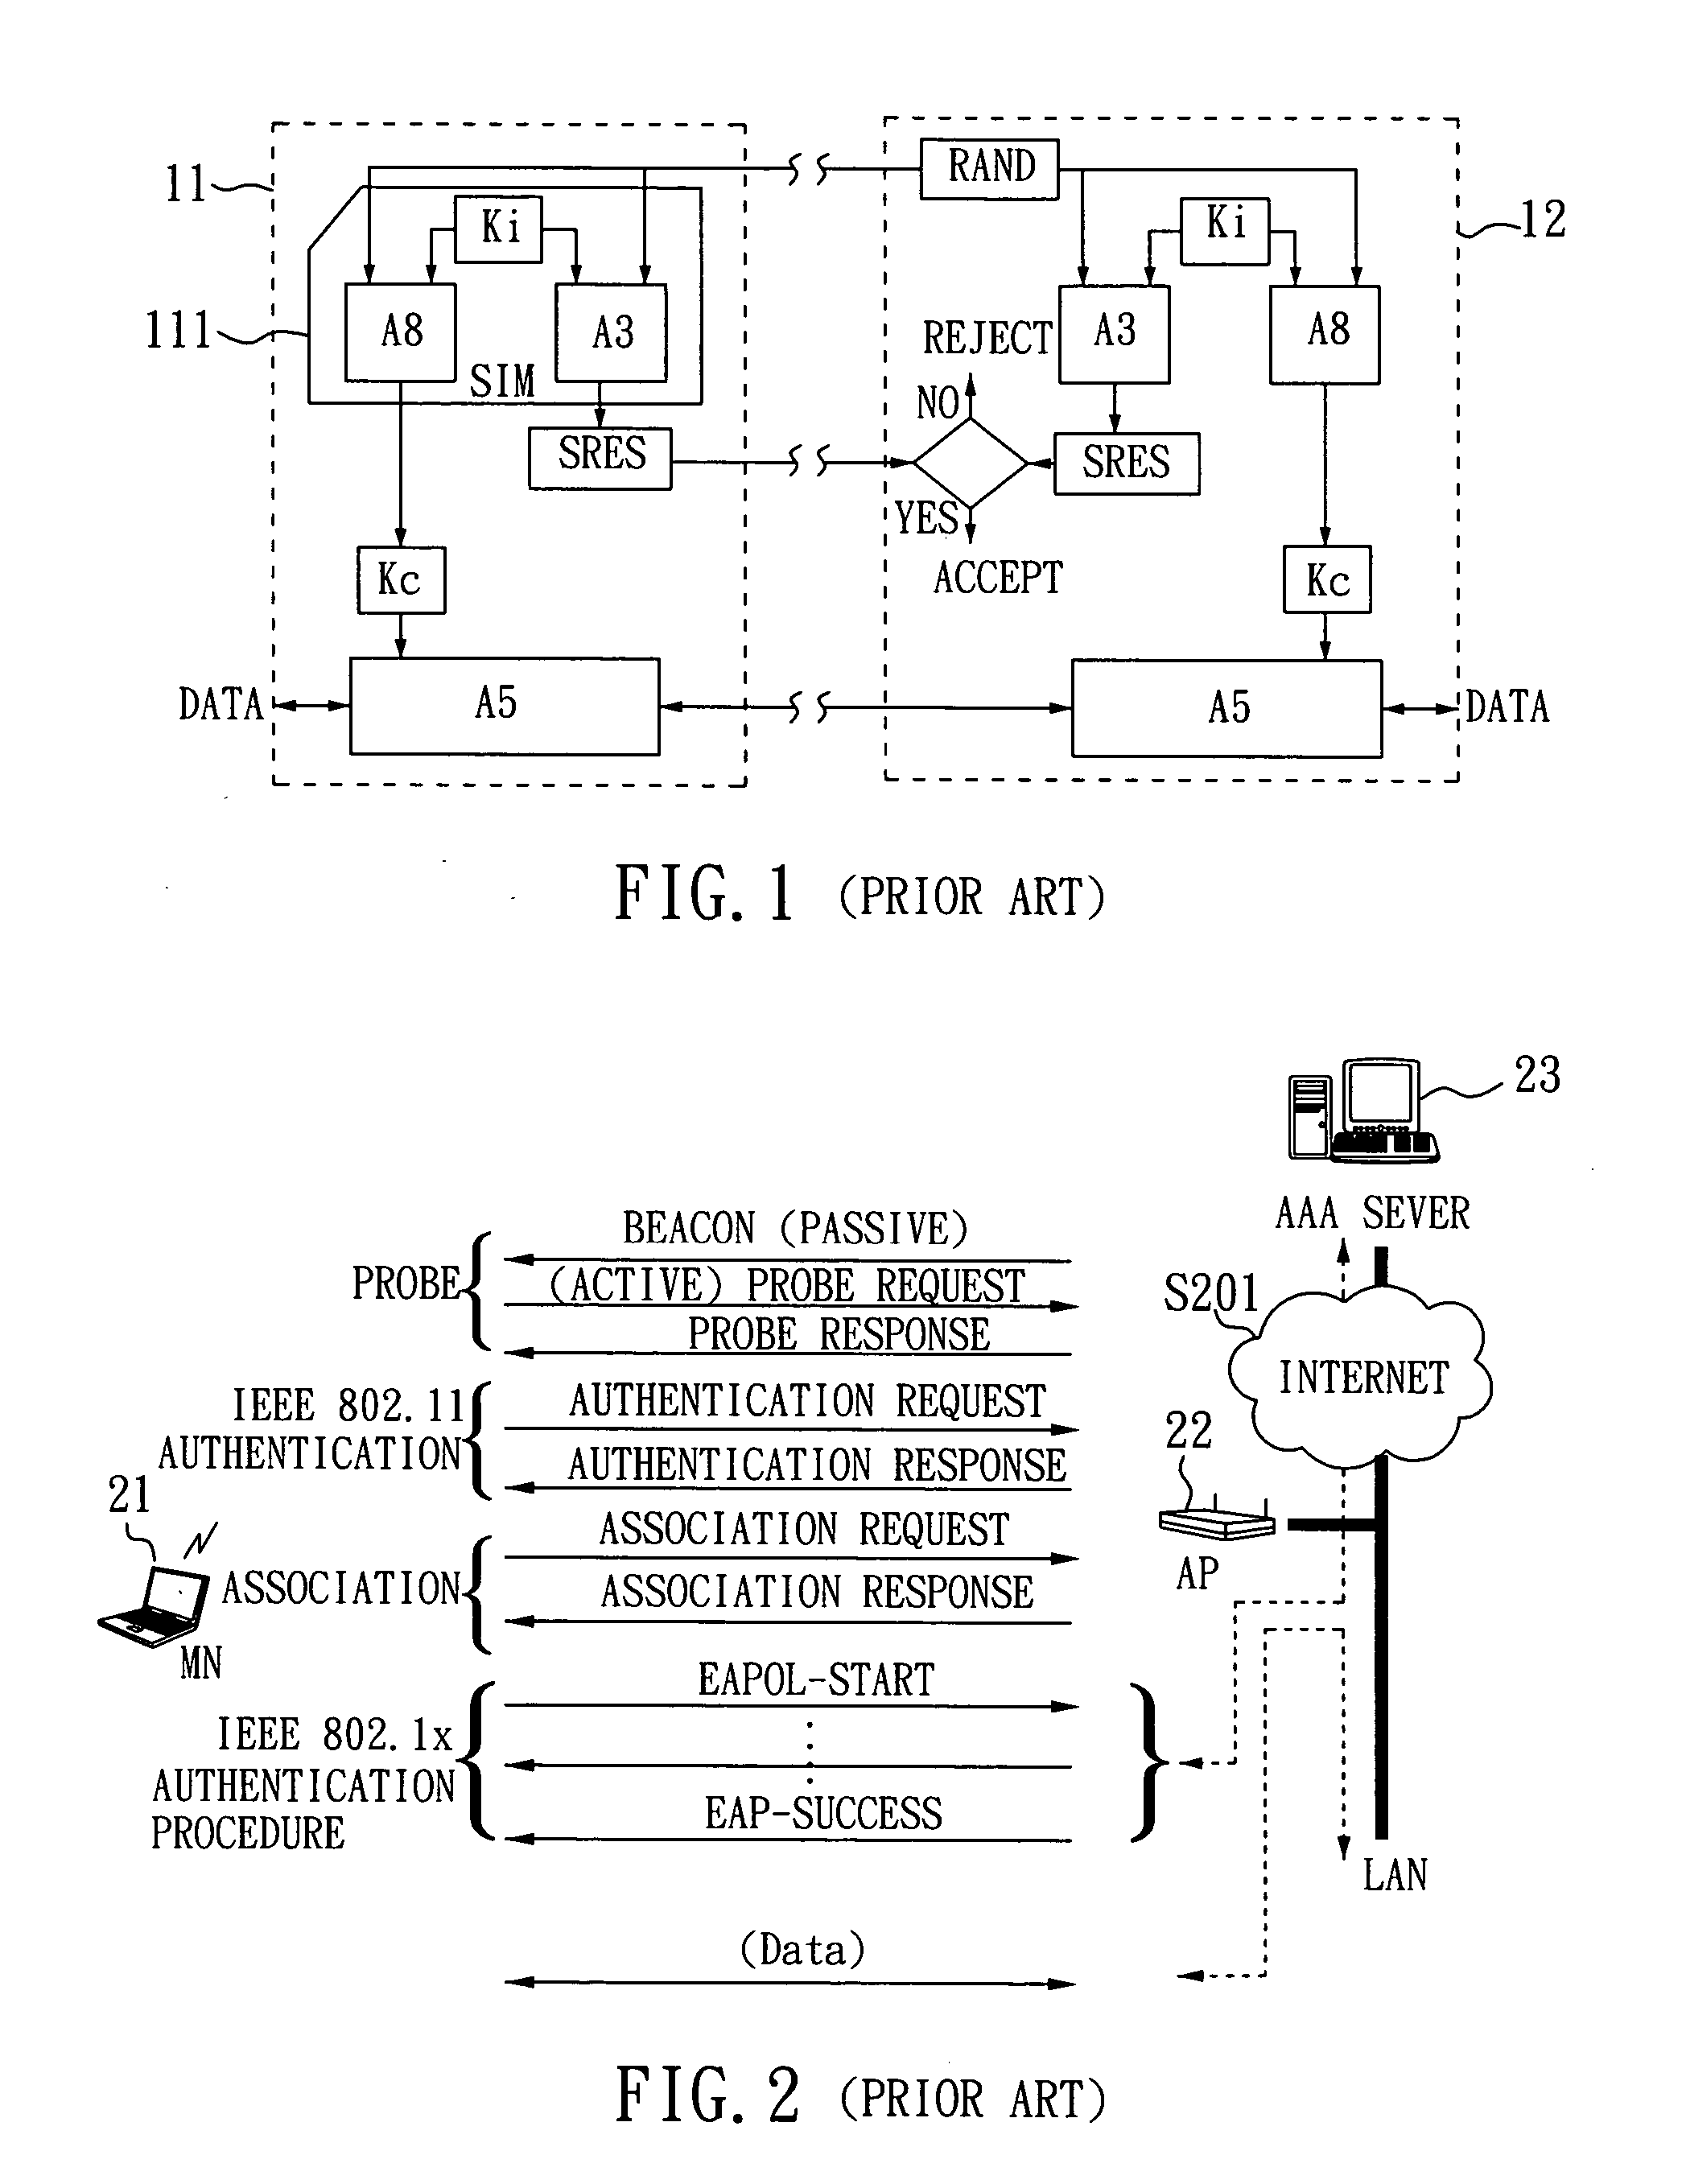 SIM-based authentication method capable of supporting inter-AP fast handover